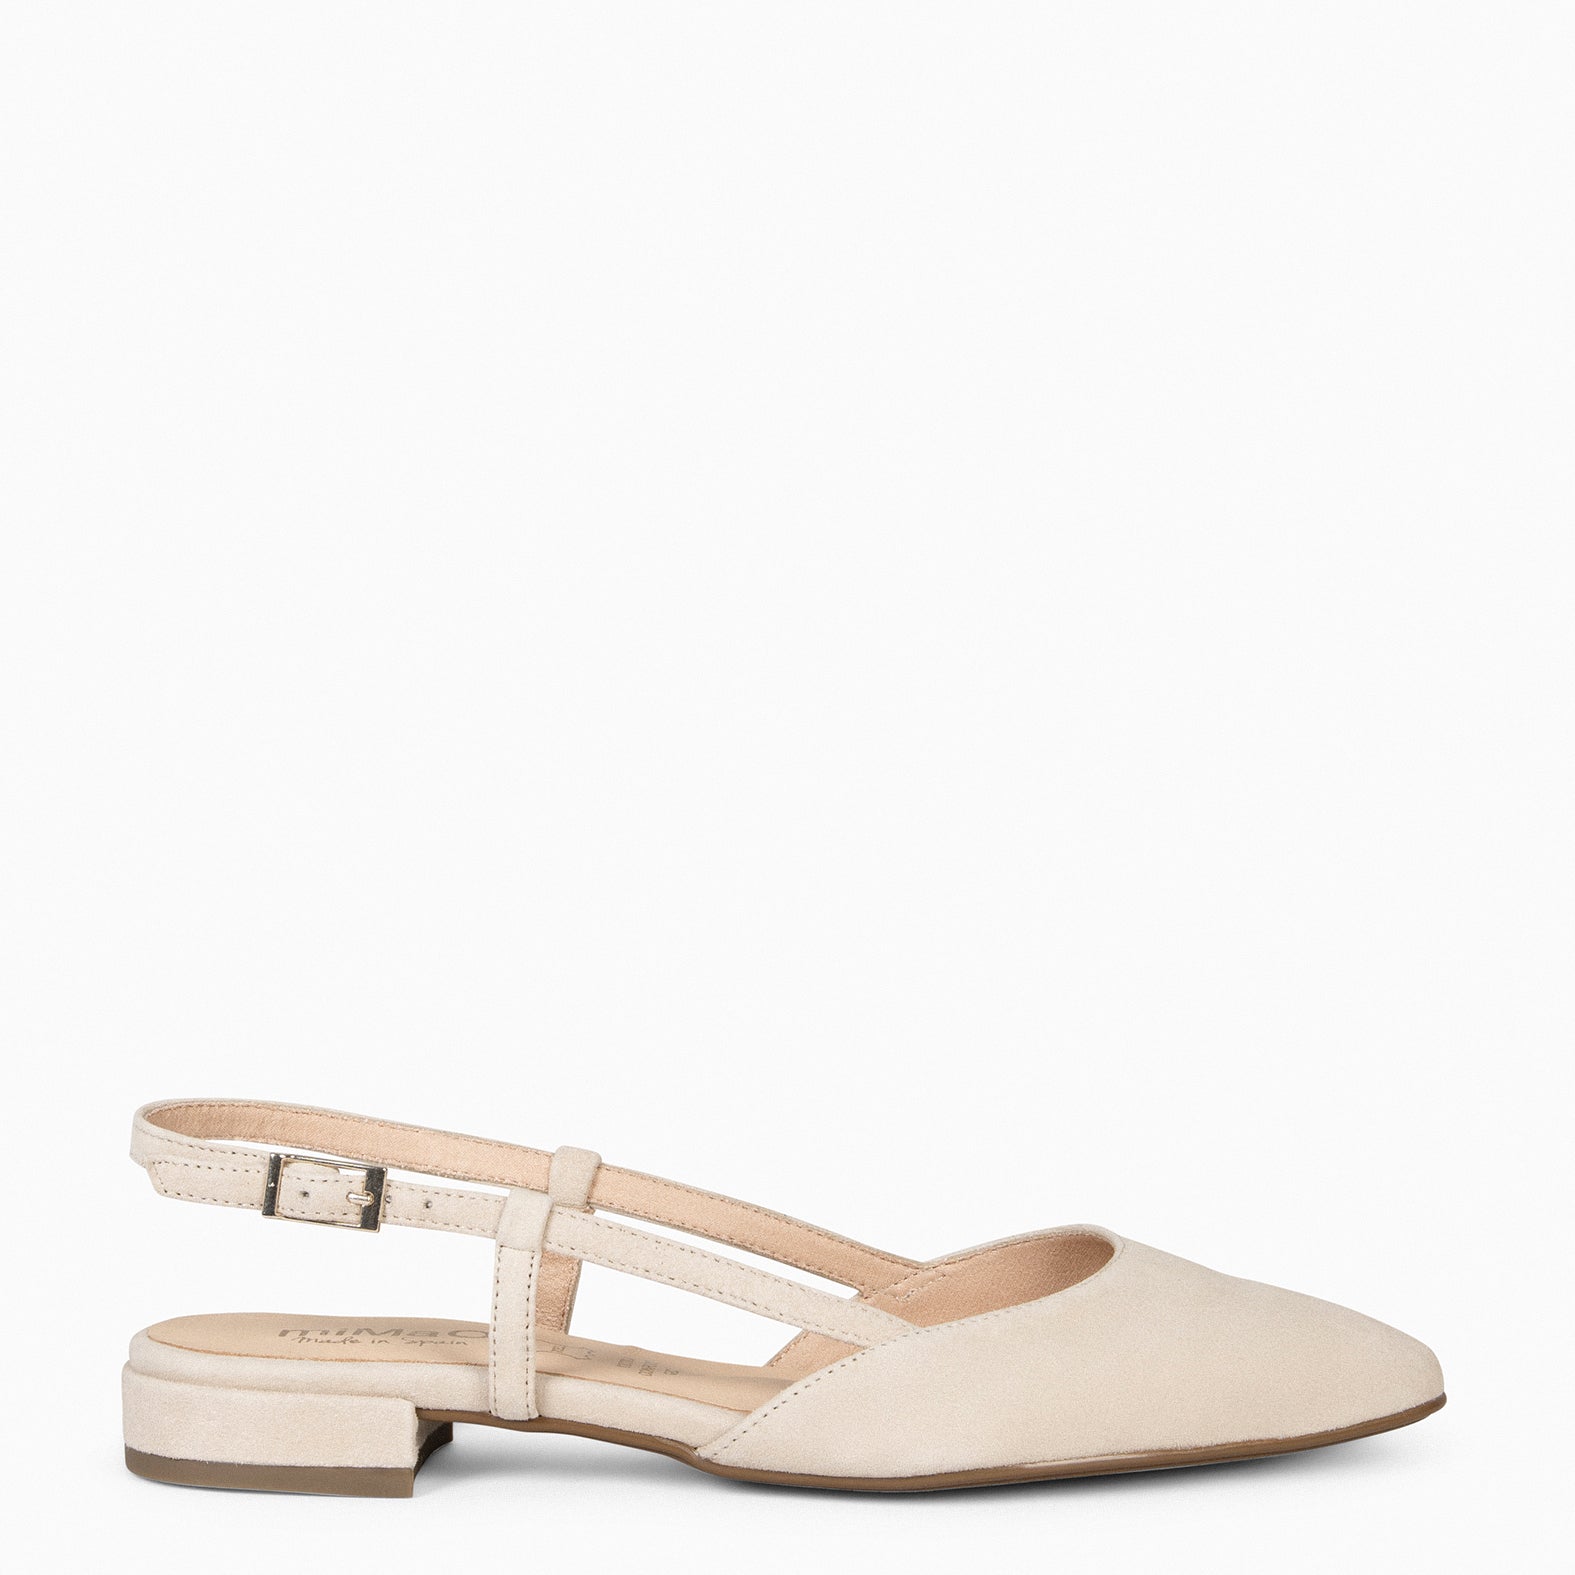 BRUNCH – Chaussures Slingbacks plates TAUPE